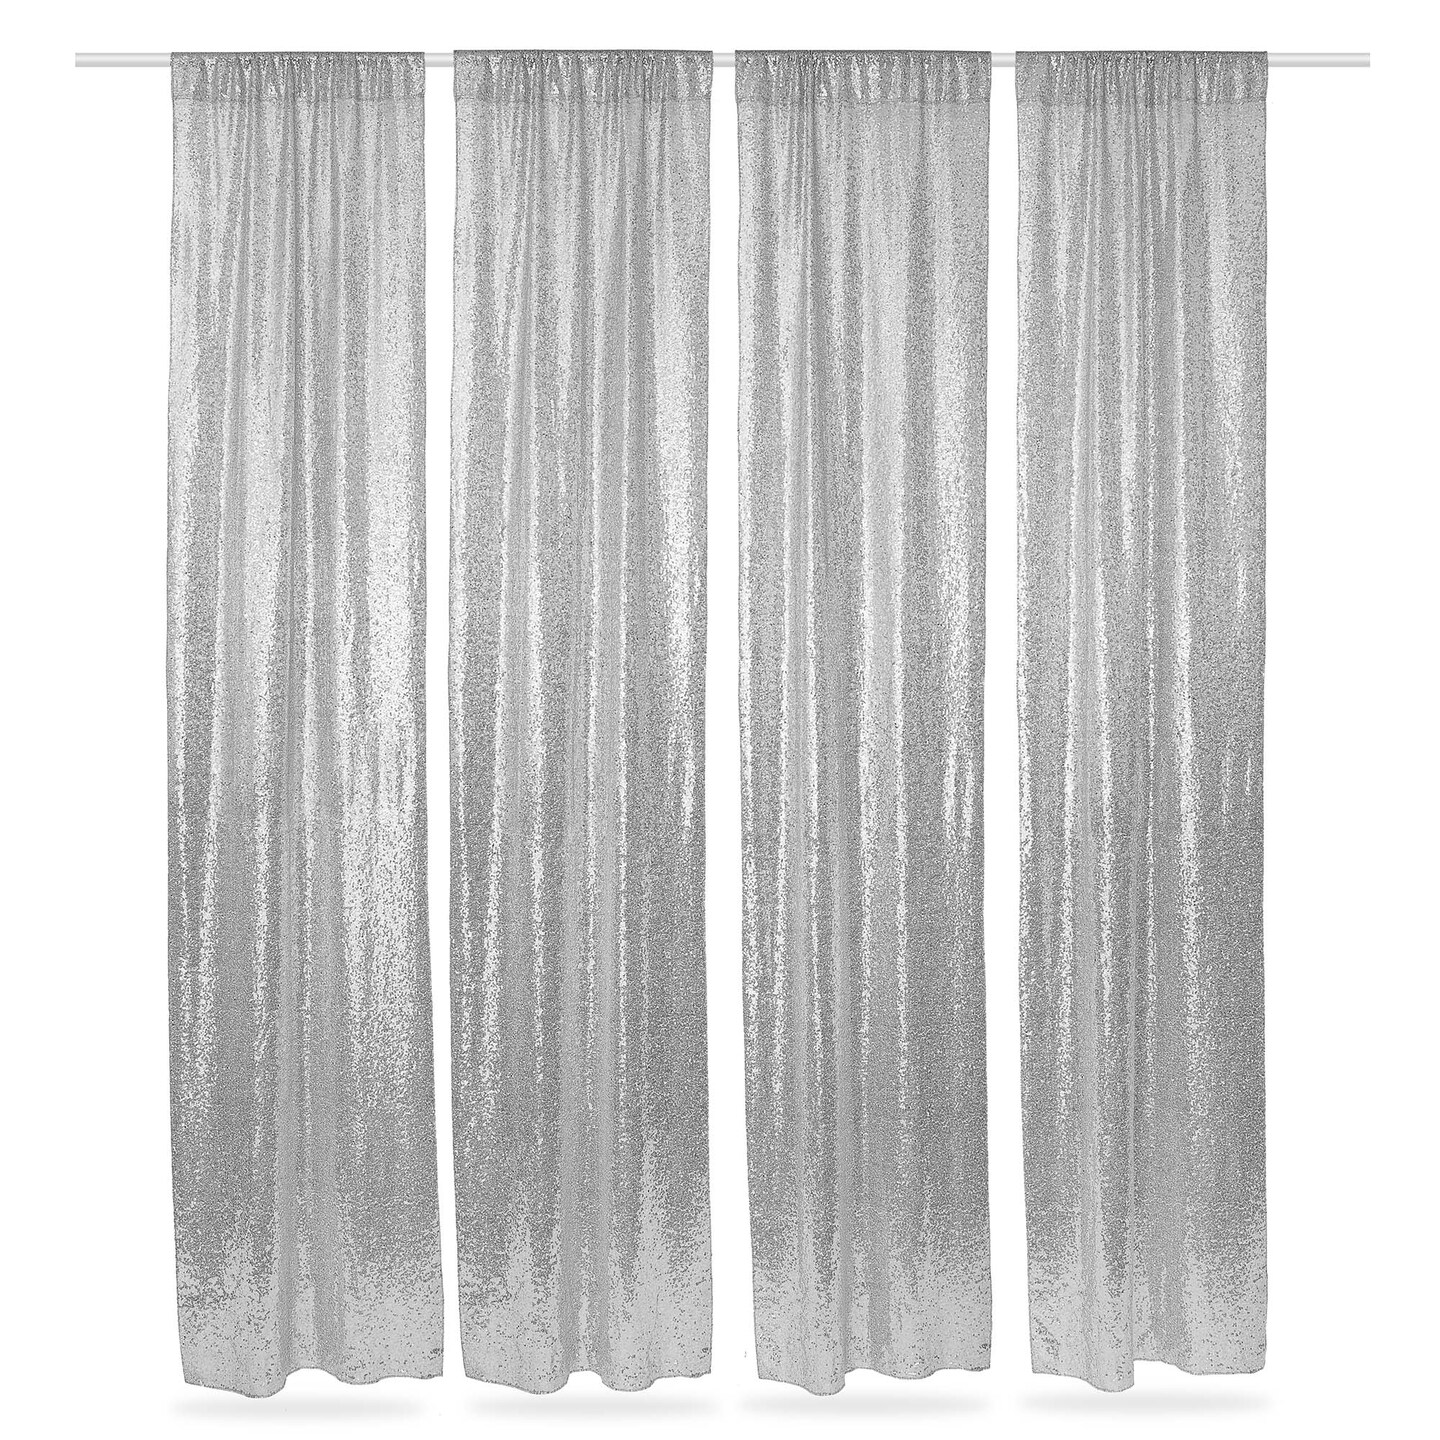 Lann's Linens (Set of 4) Sequin Photography Backdrop Curtains - 2ft x 8ft Tall Glitter Background Panels for Wedding, Party or Photo Booth